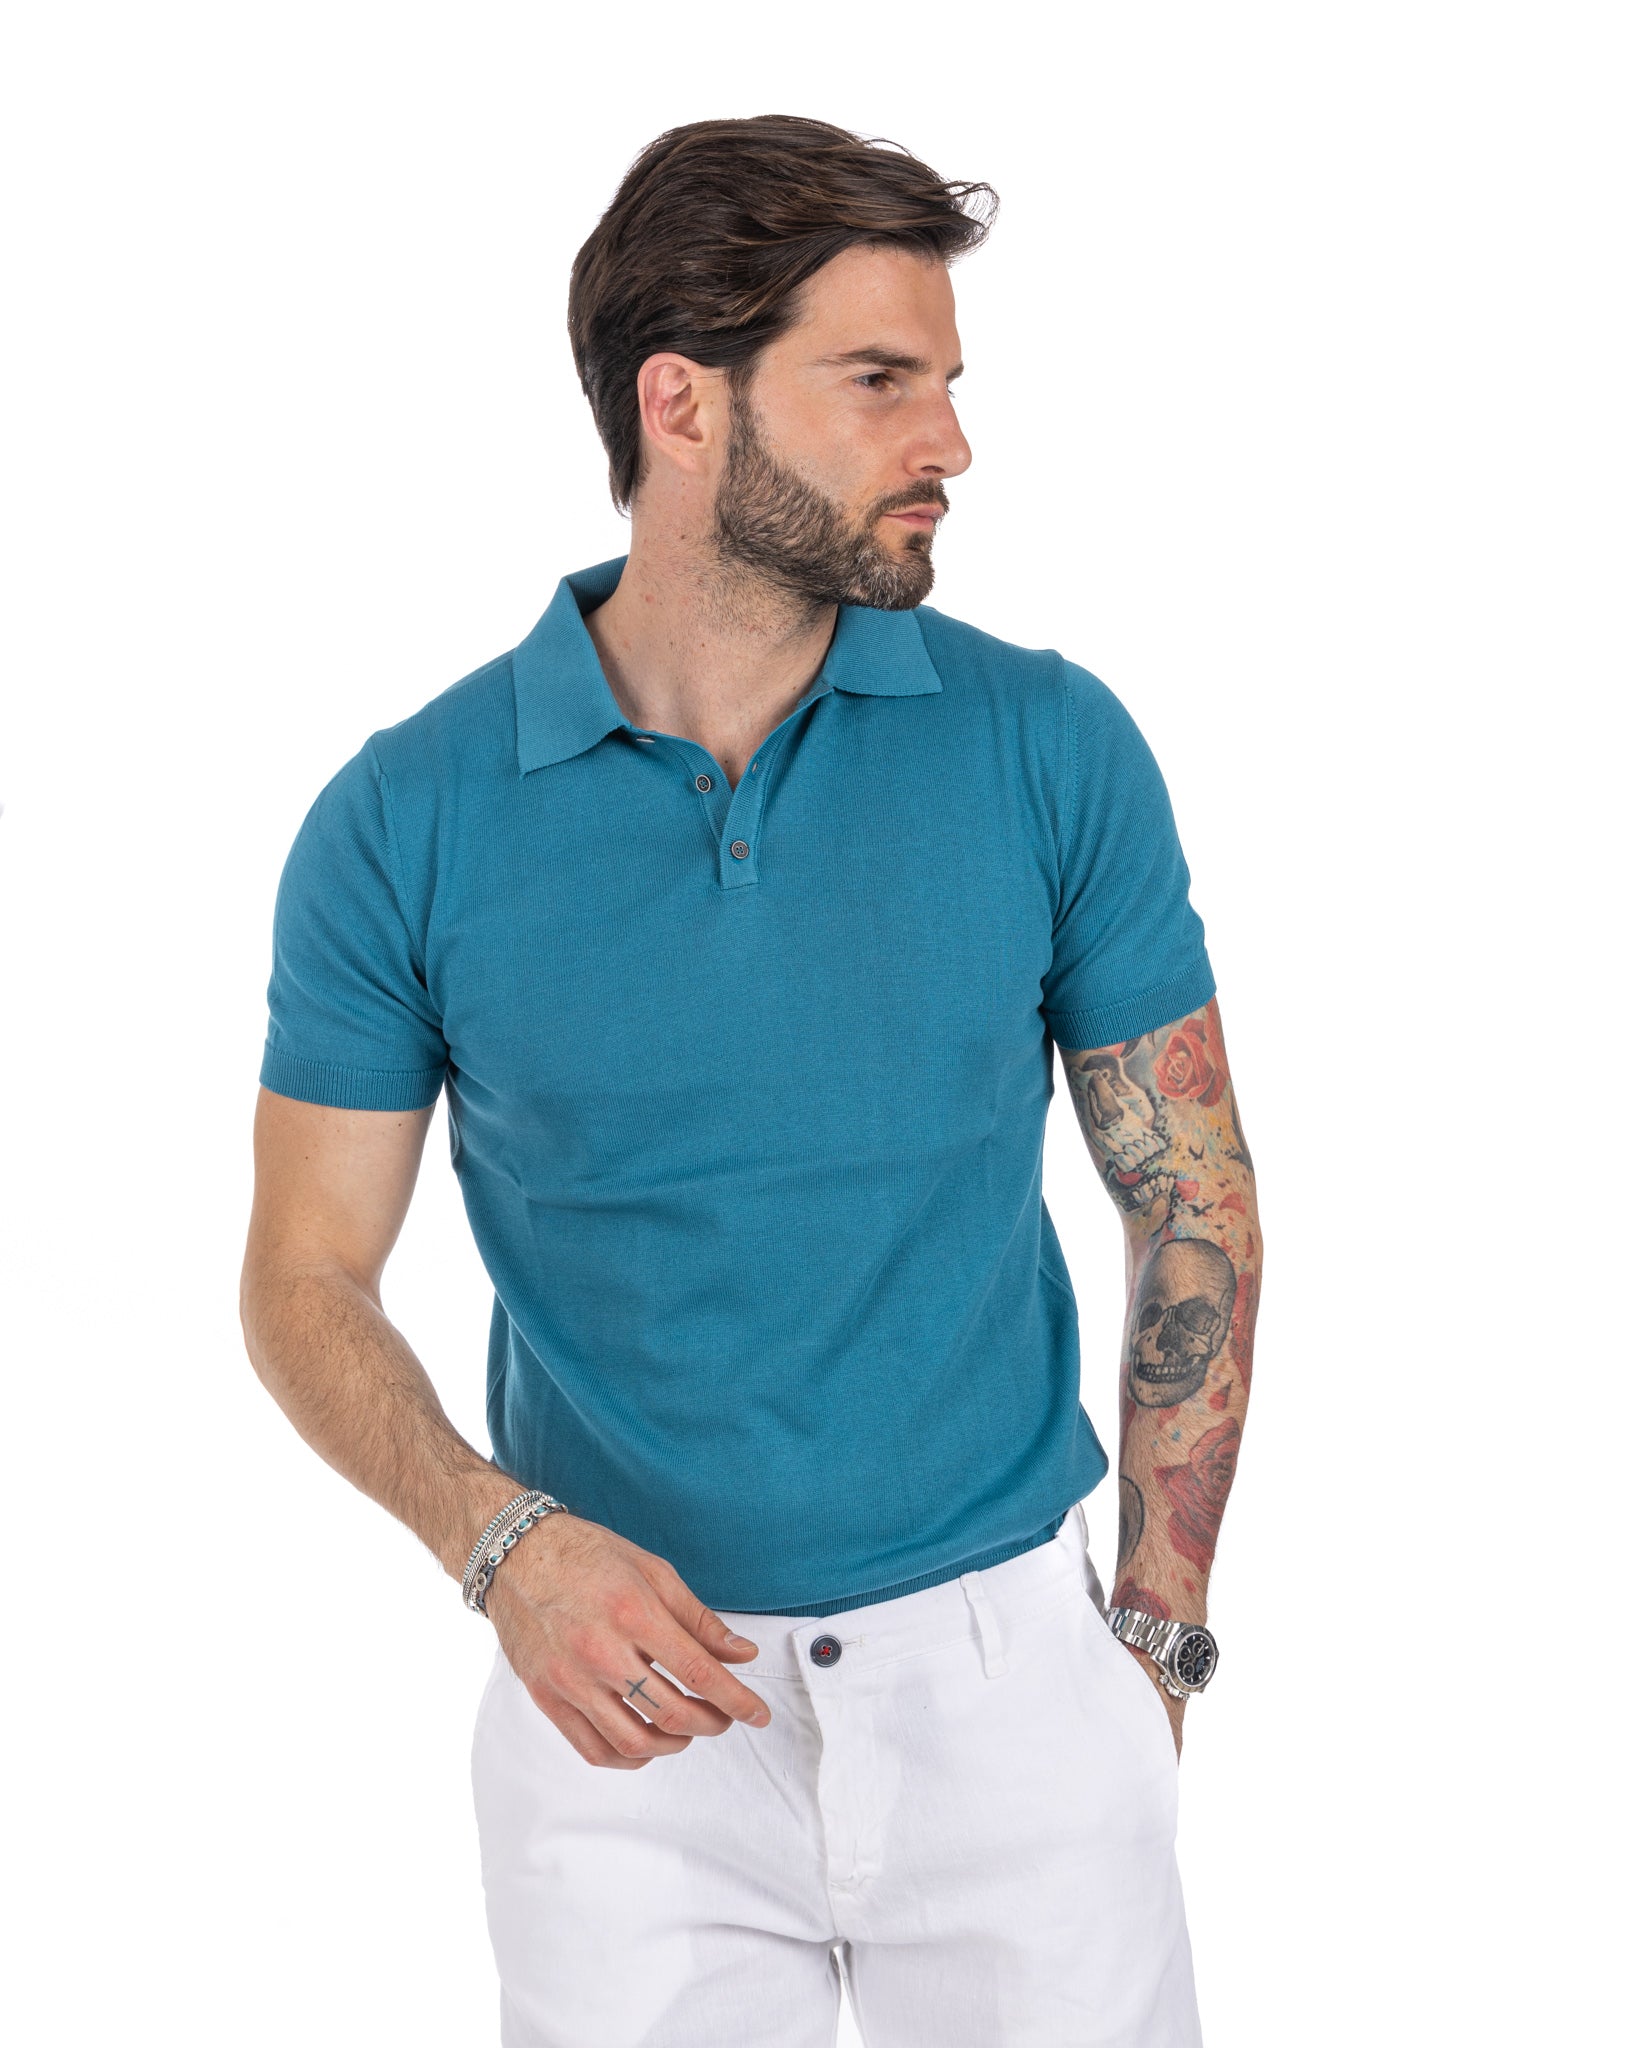 Roger - teal knitted polo